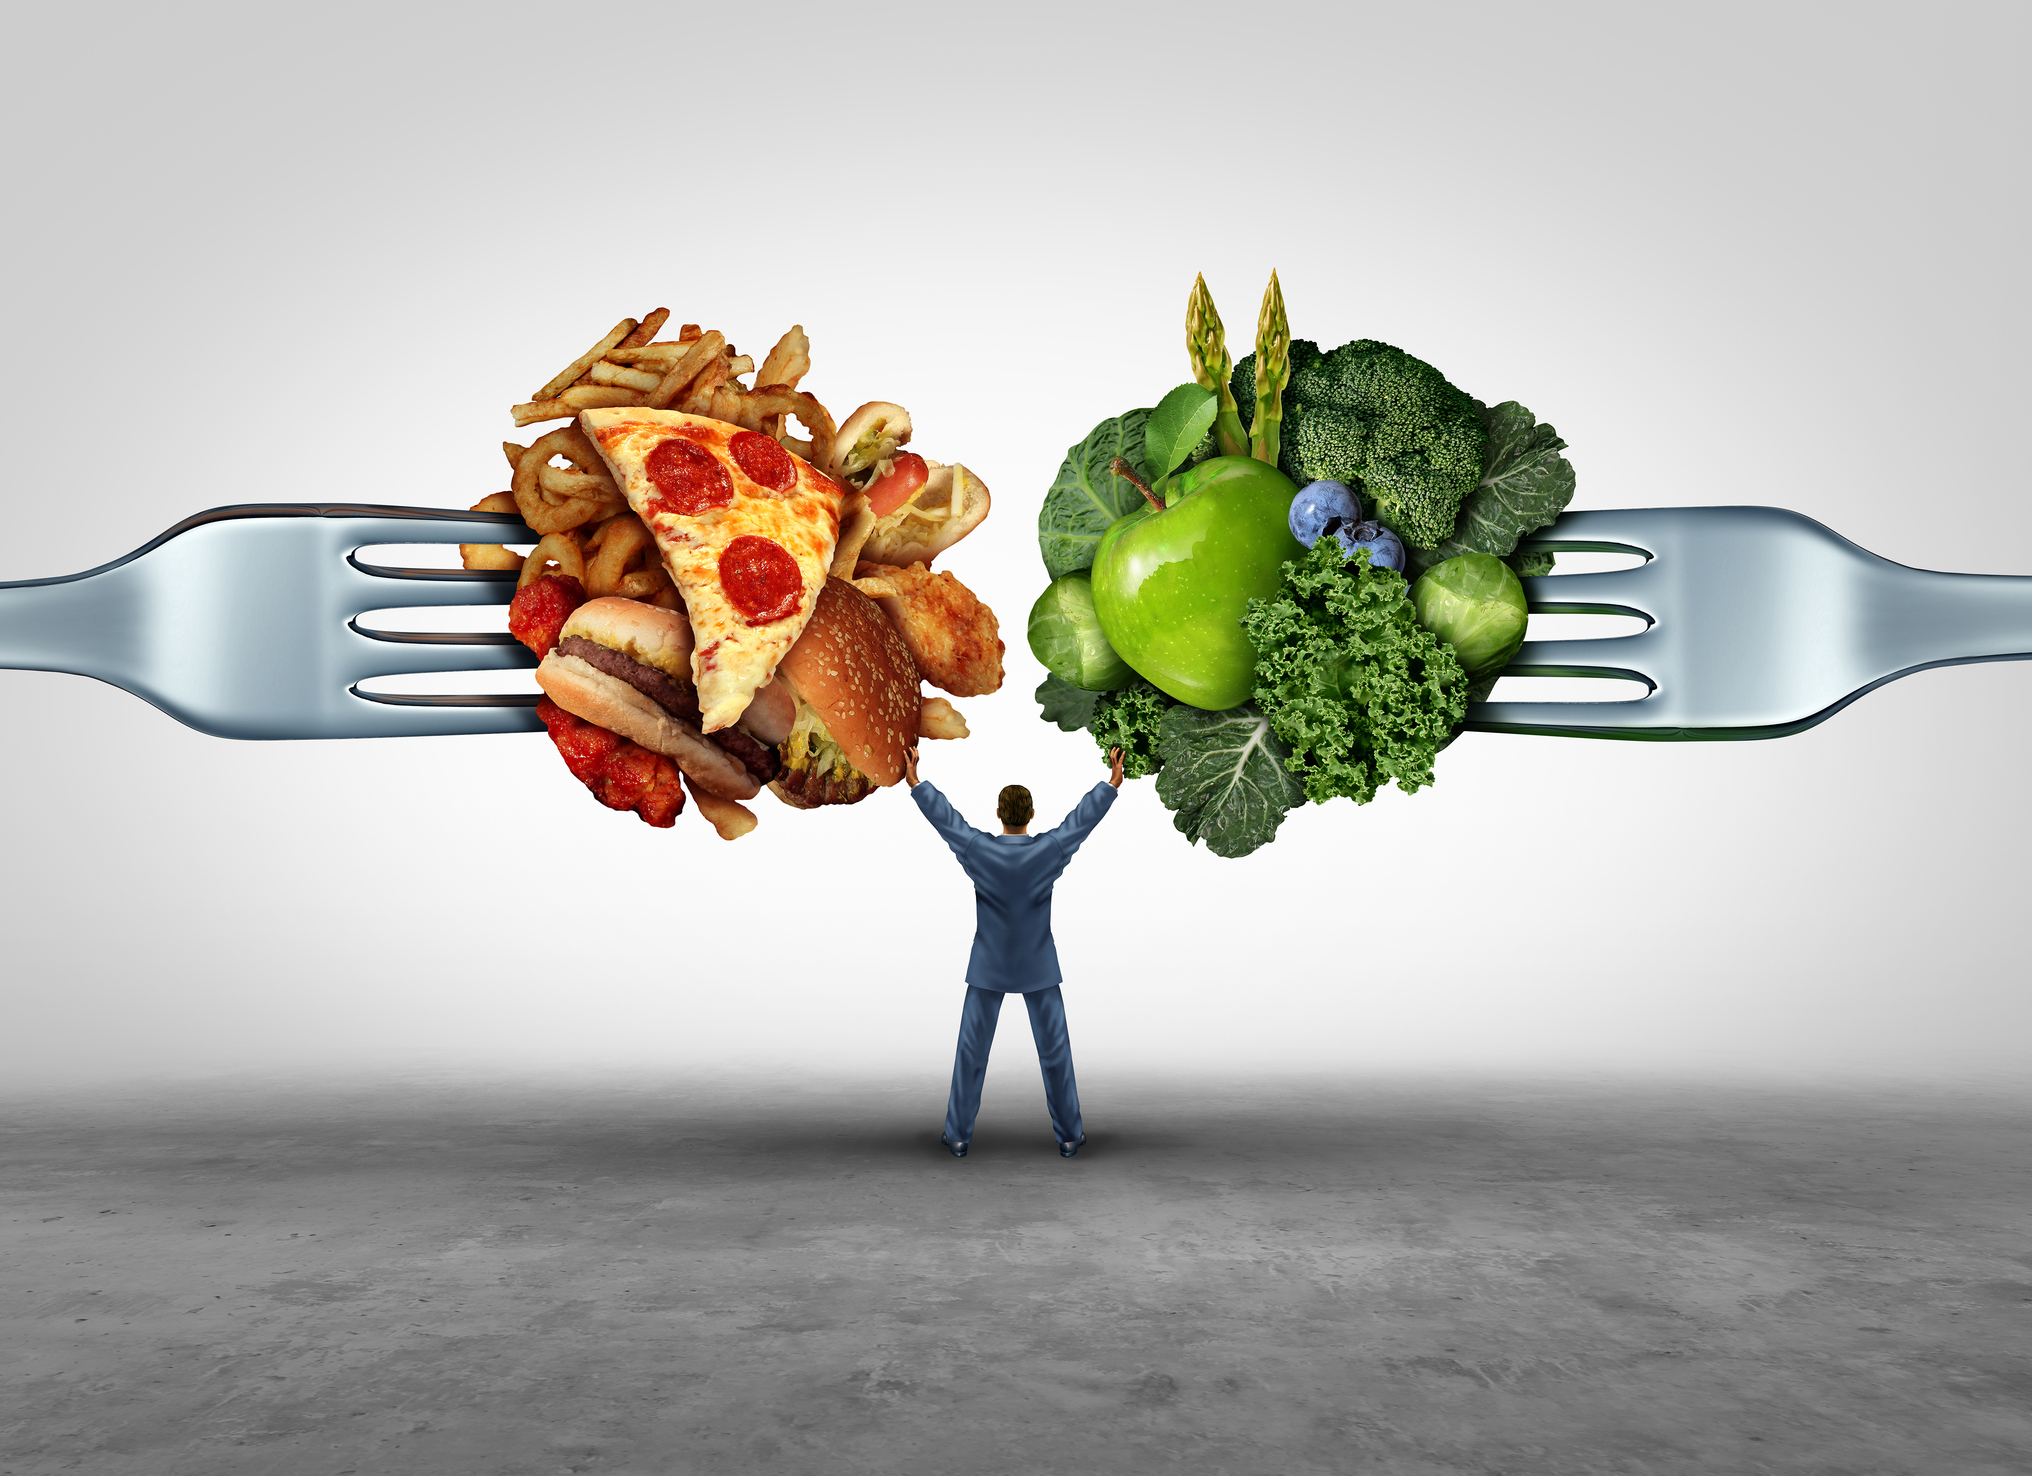 Food health decision and diet choice concept and nutrition options dilemma between healthy good fresh fruit and vegetables or greasy cholesterol rich fast food on a fork with a man in the middle uncertain of what to eat.